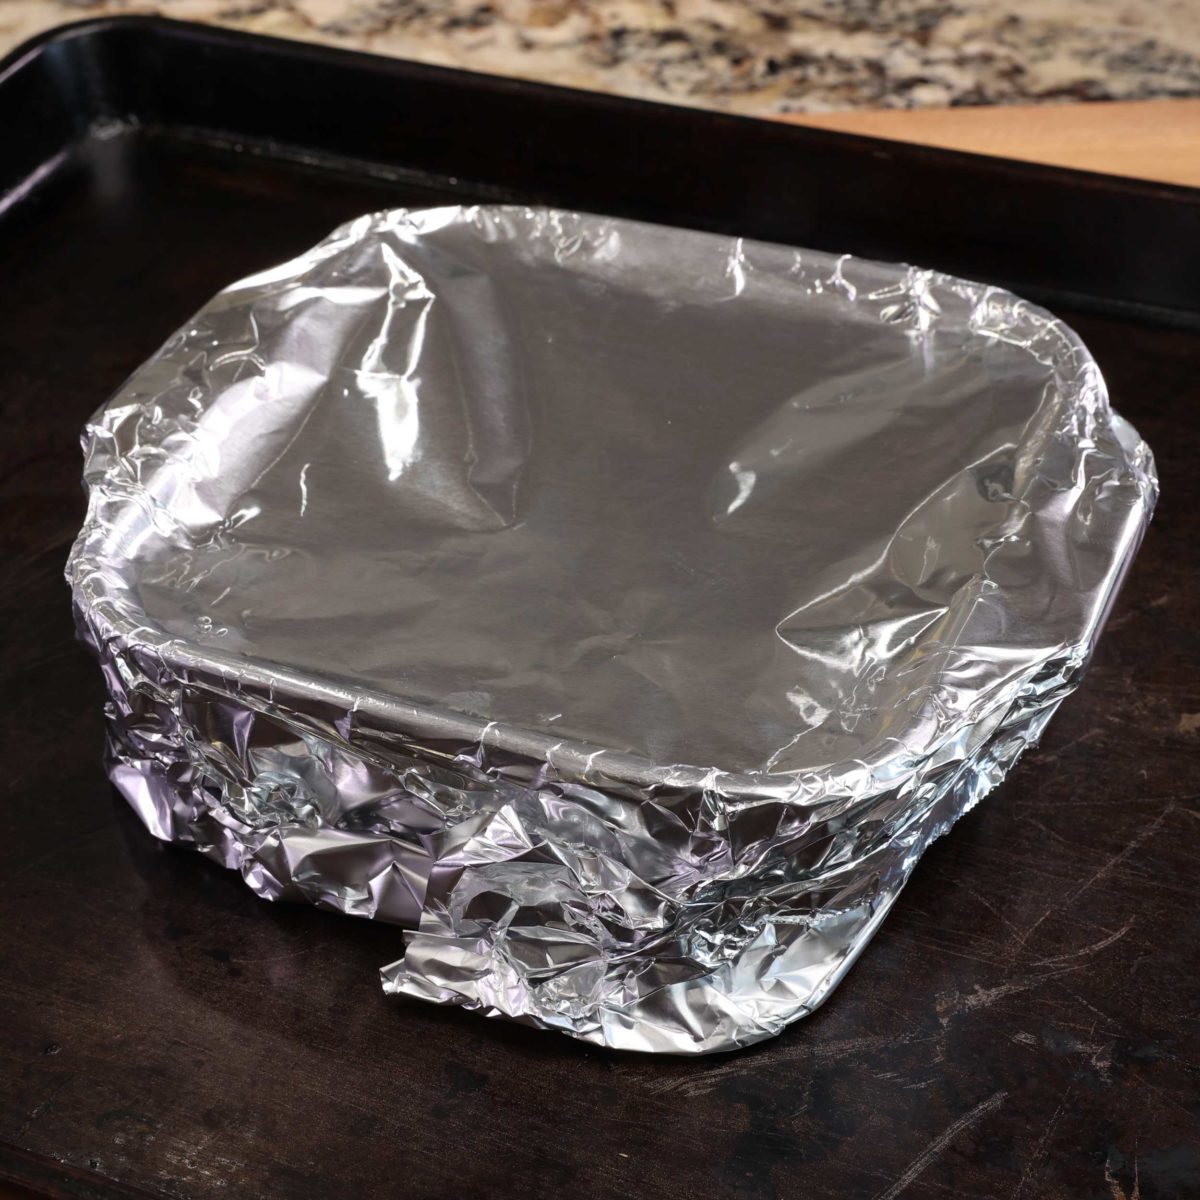 aluminum foil covering a small square baking dish on a baking sheet.